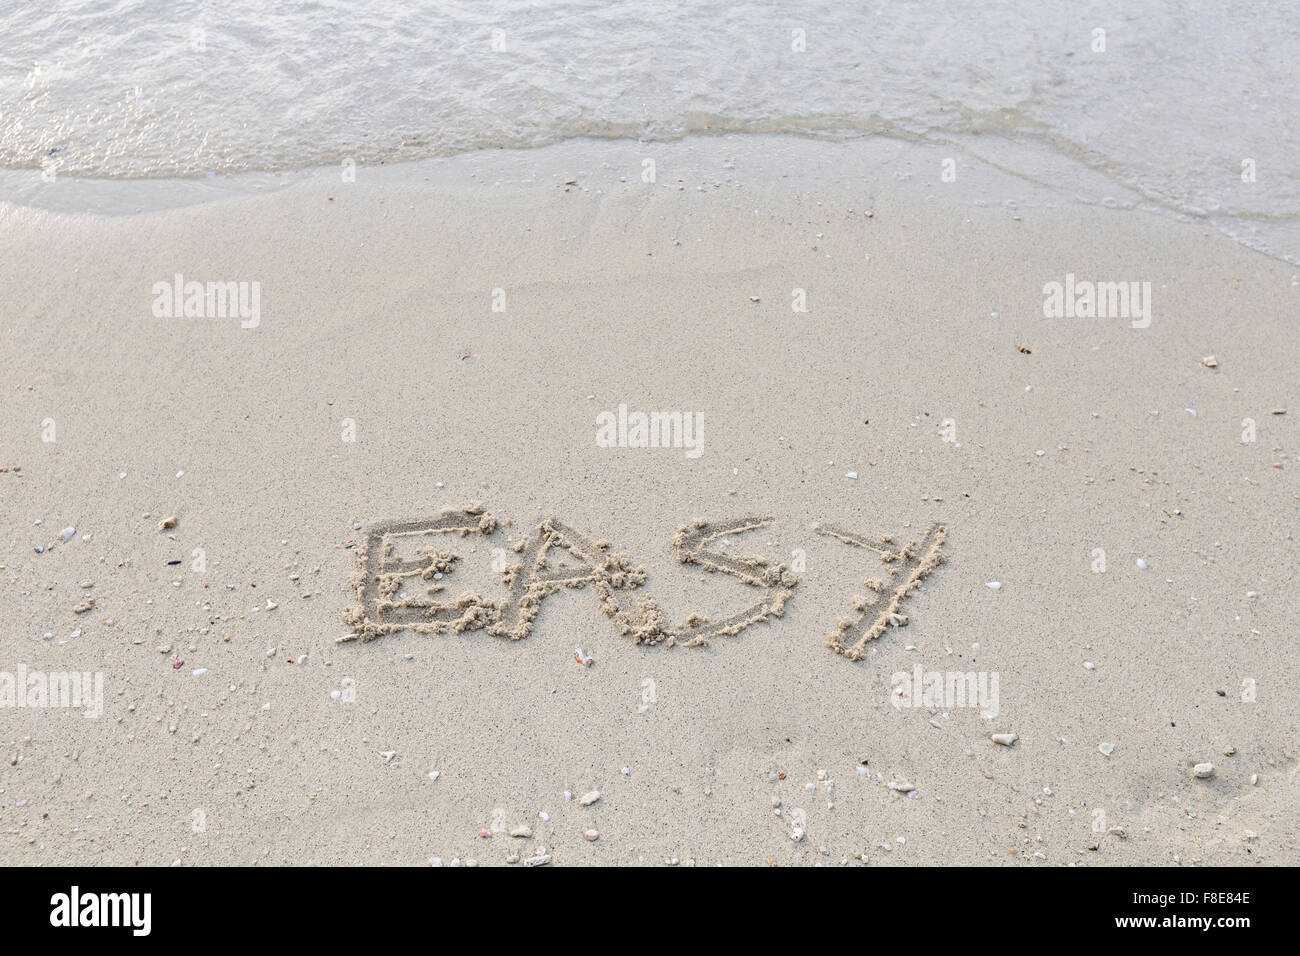 Easy written out in wet sand Stock Photo